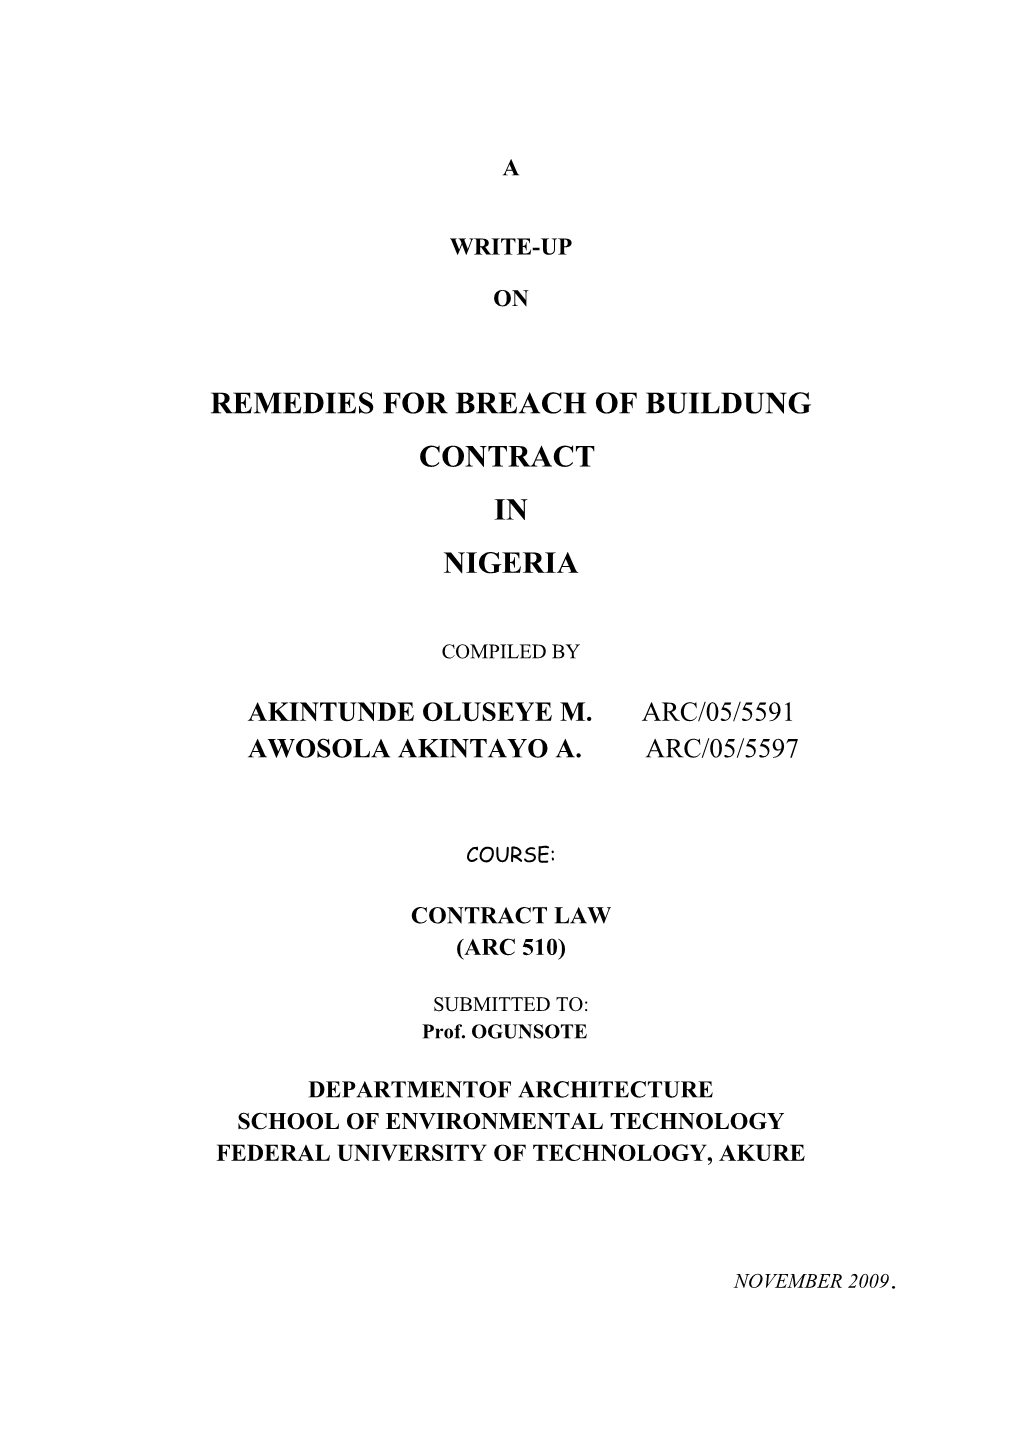 Remedies for Breach of Buildung Contract